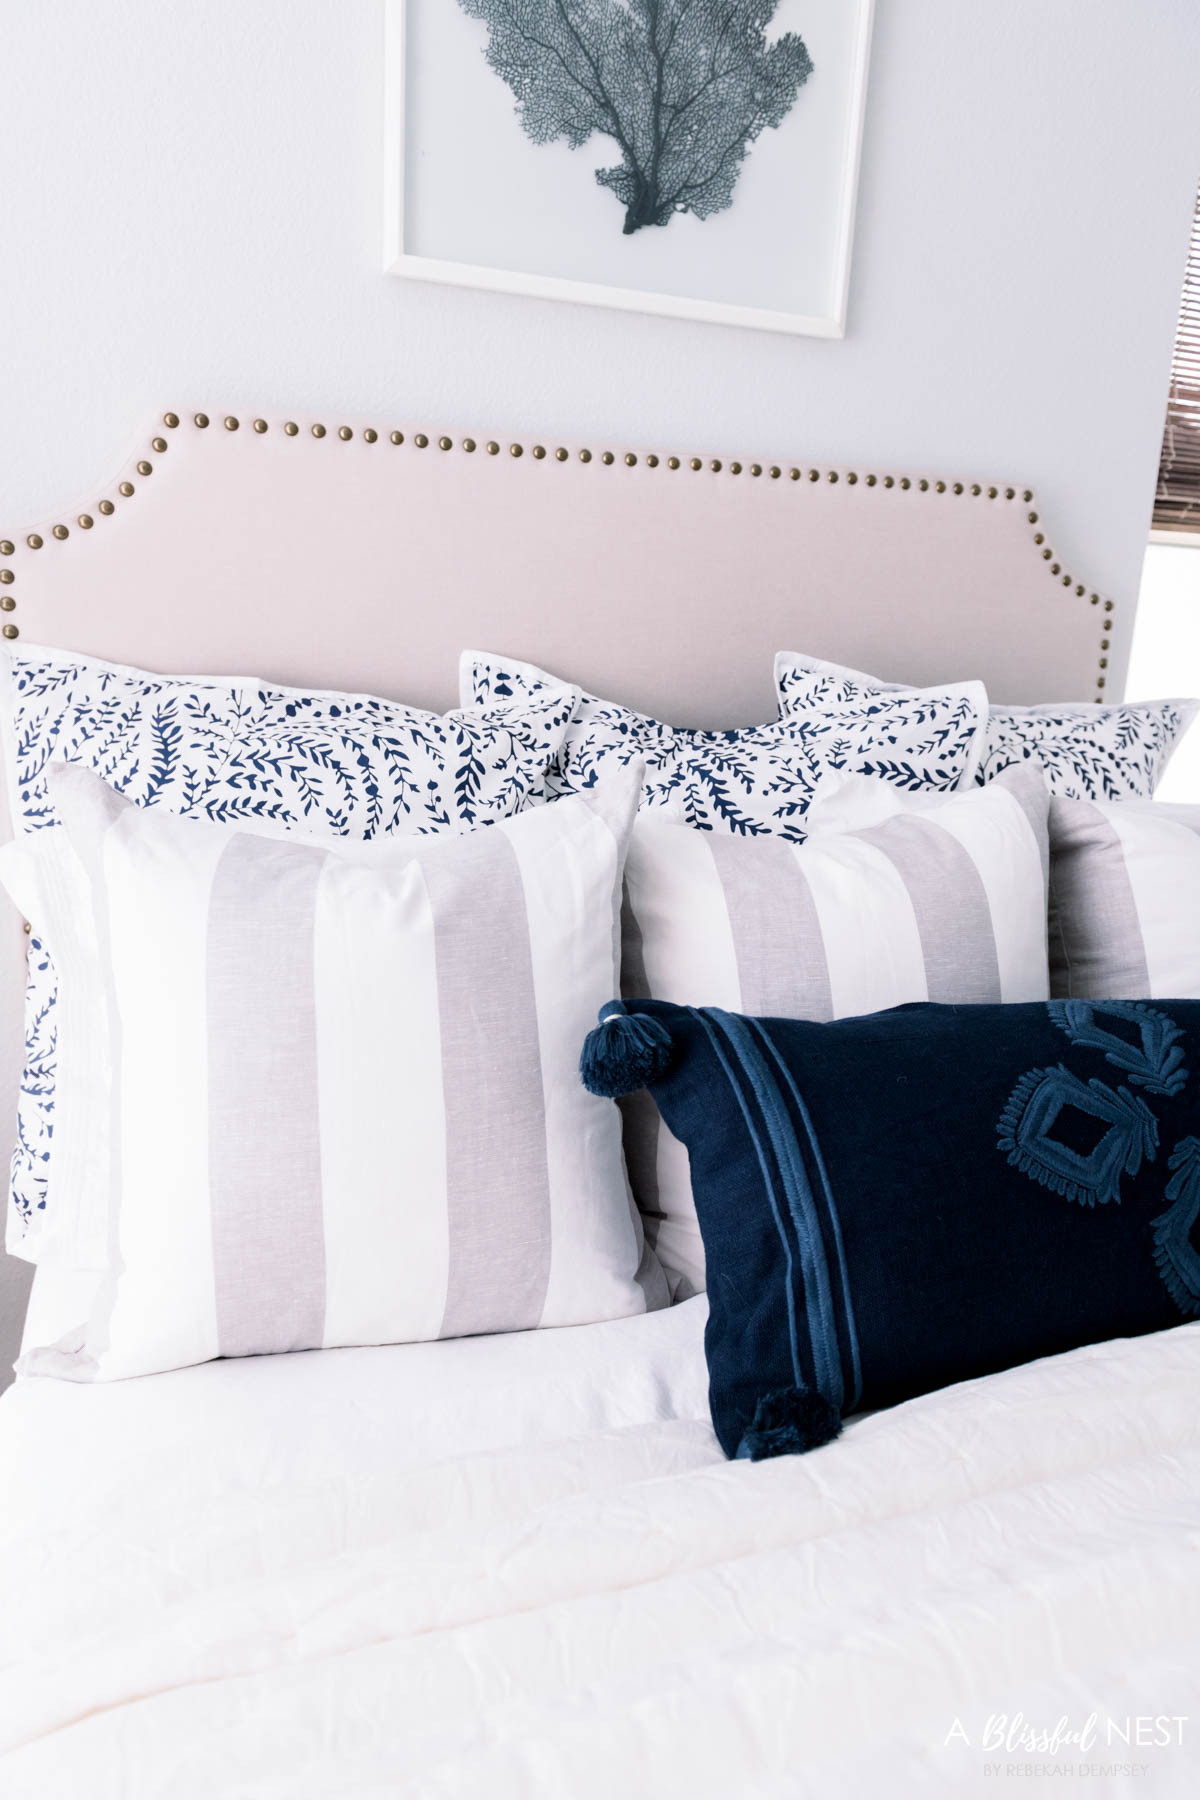 3 layers of pillows on a bed create a cozy look